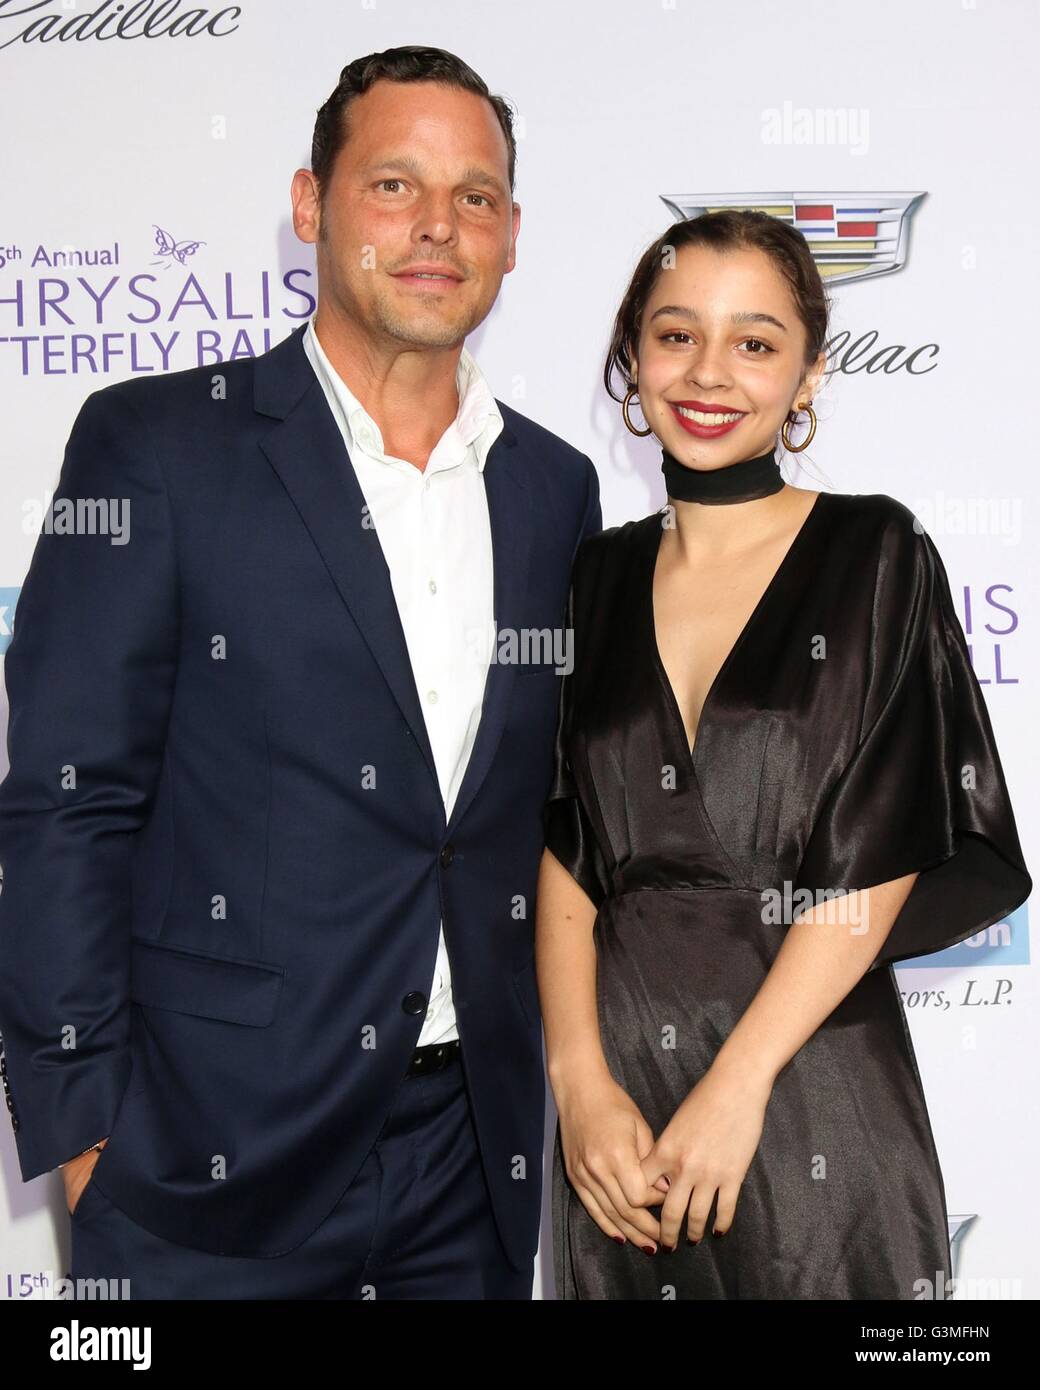 Los Angeles, CA, USA. 11th June, 2016. Justin Chambers, Daughter at arrivals for 15th Annual Chrysalis Butterfly Ball, Private Mandeville Canyon Estate, Los Angeles, CA June 11, 2016. © Priscilla Grant/Everett Collection/Alamy Live News Stock Photo